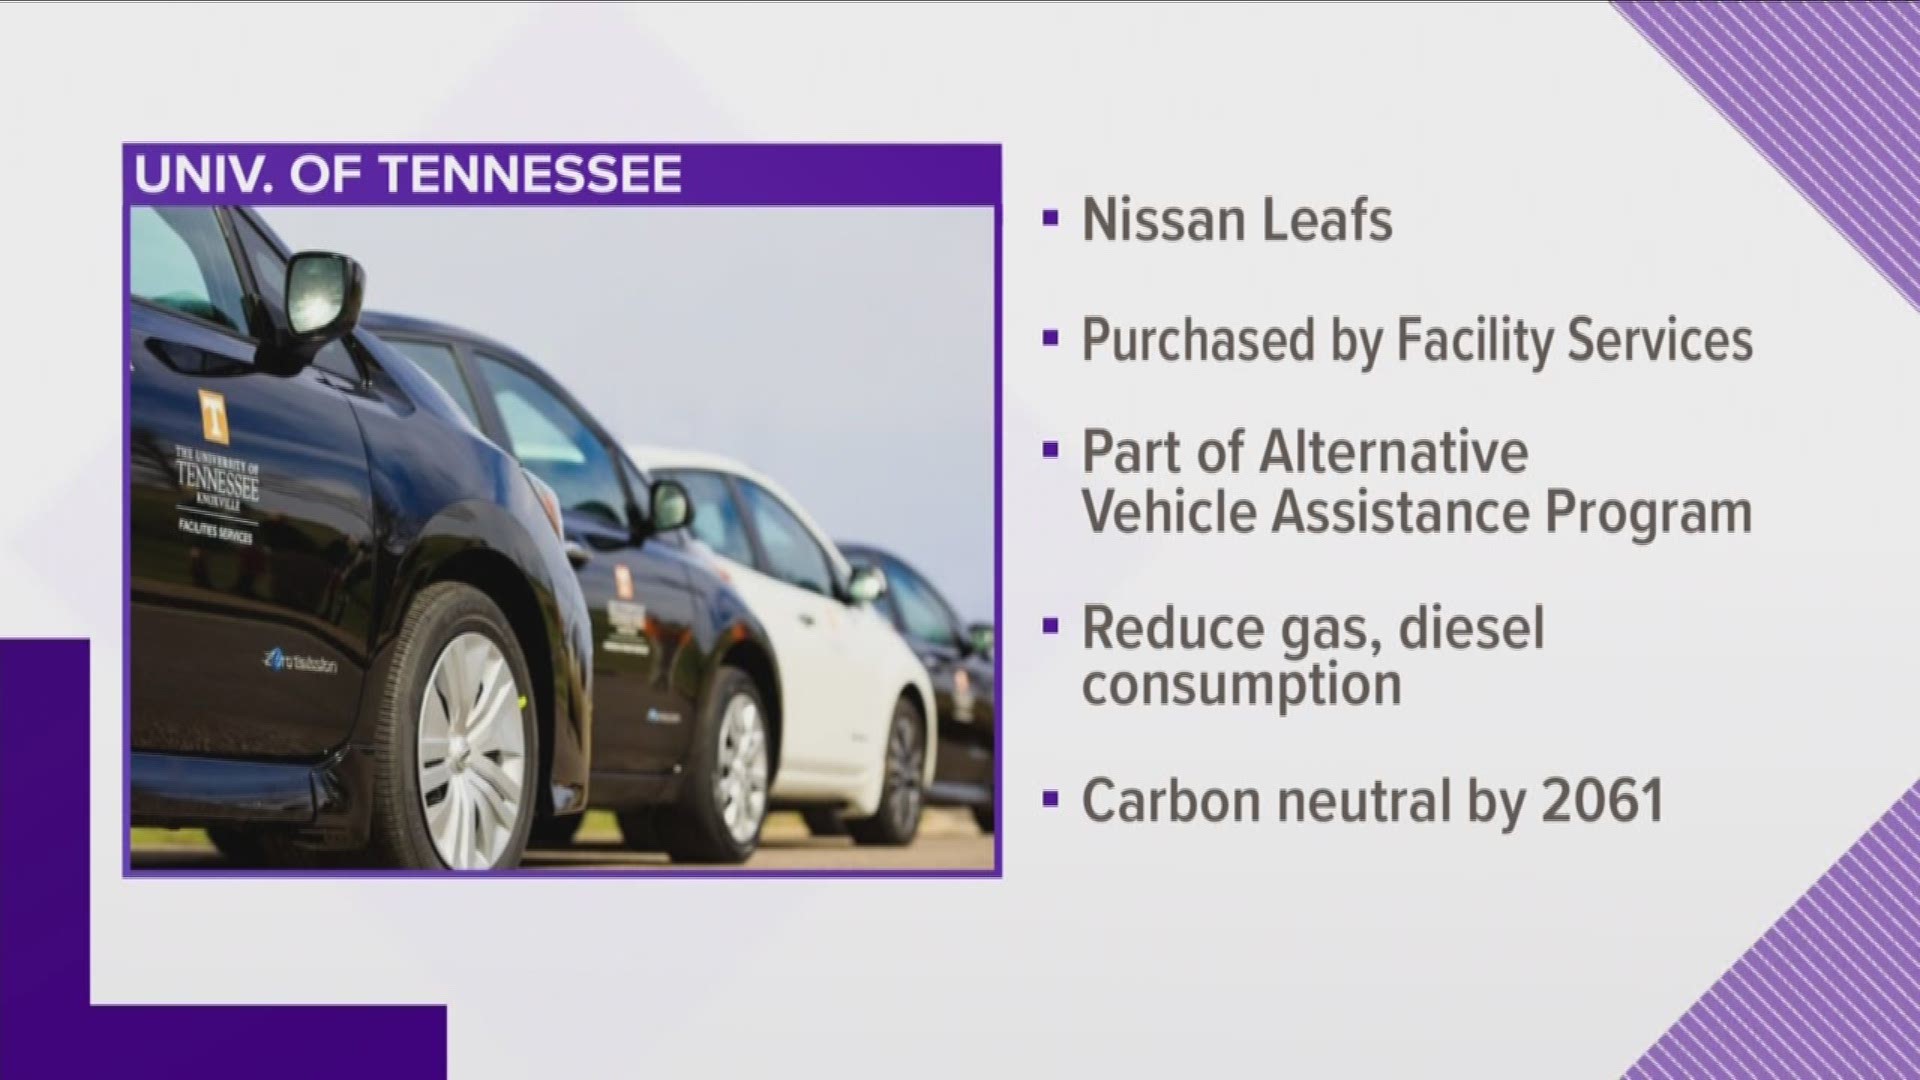 UT has eight new electric vehicles. The university says the Nissan Leafs are for facility services employees.